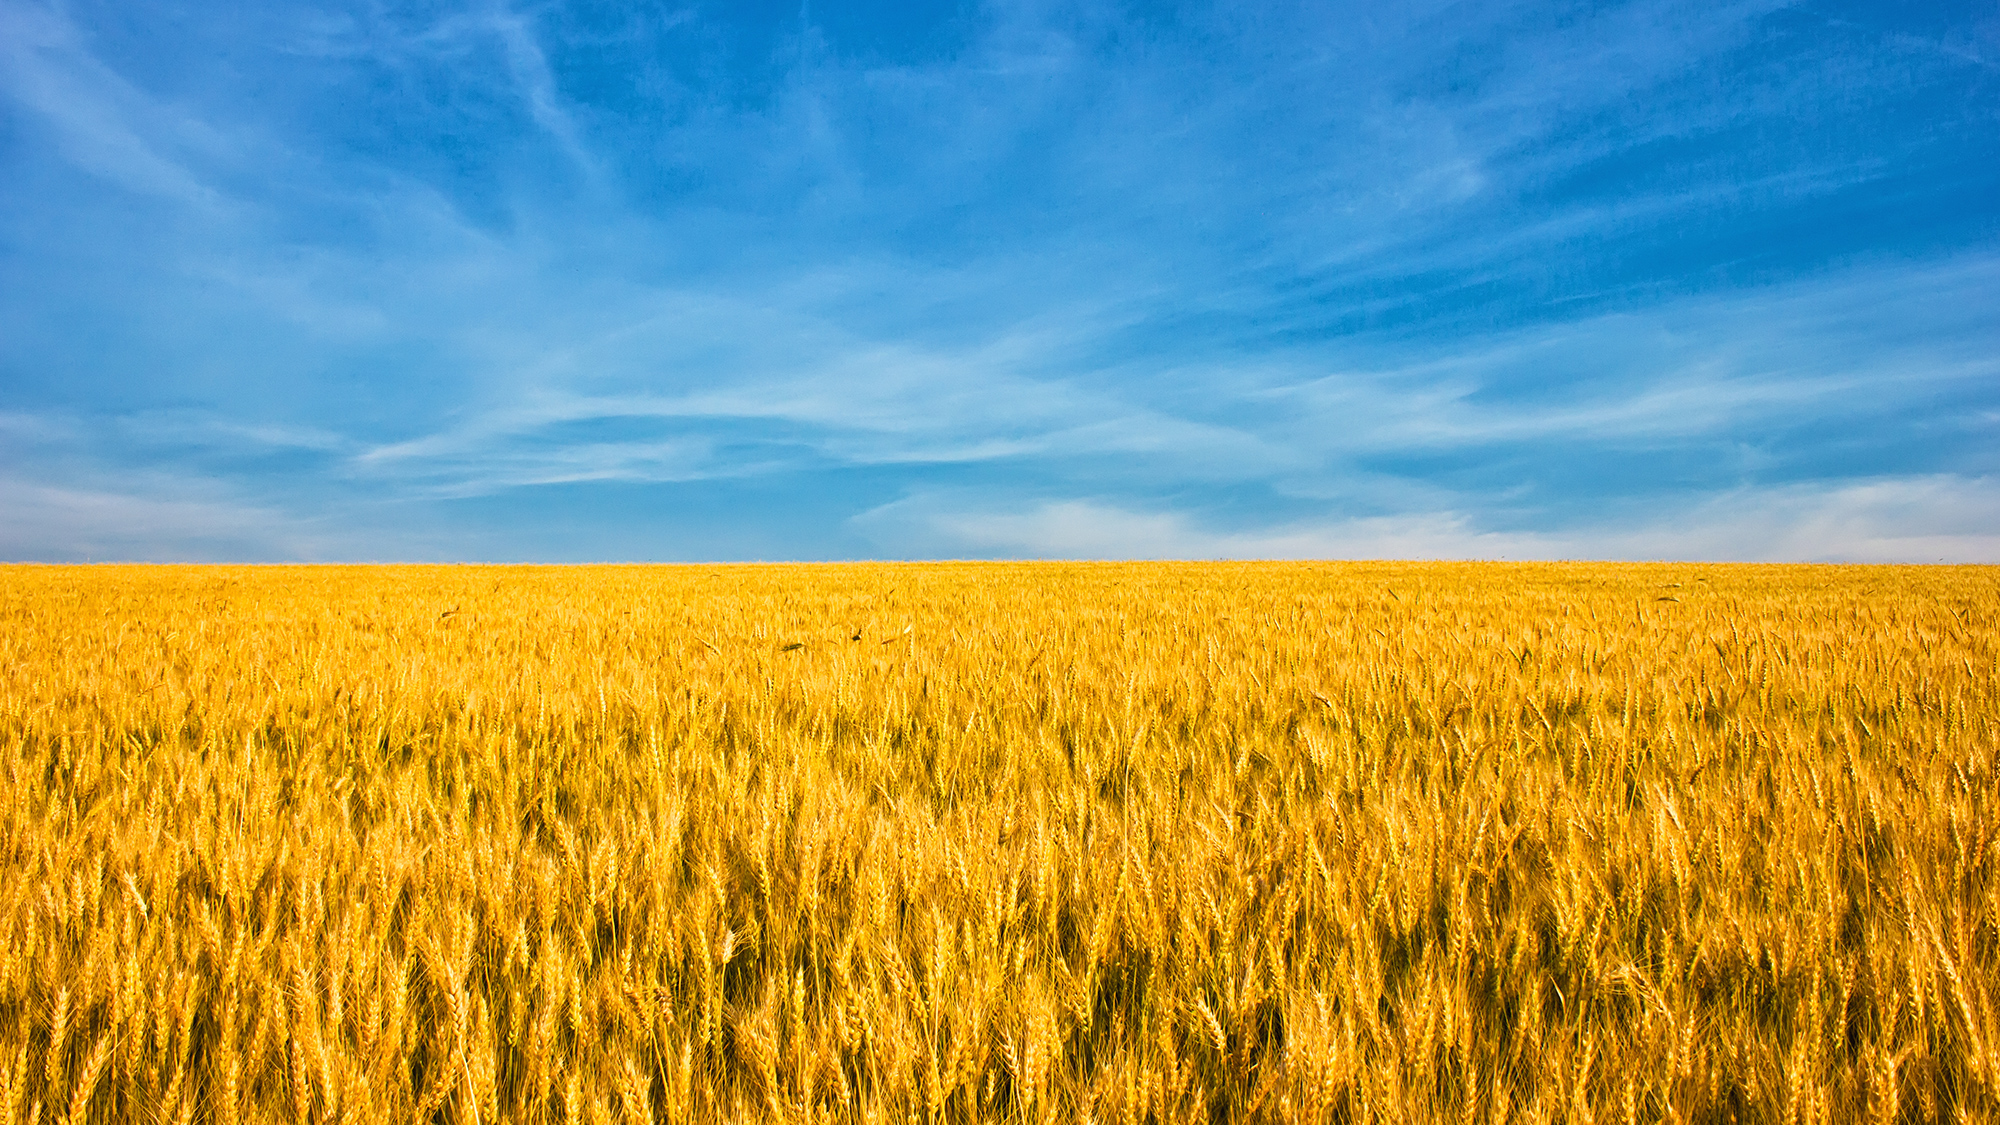 Wheat field with blue sky (16:9)